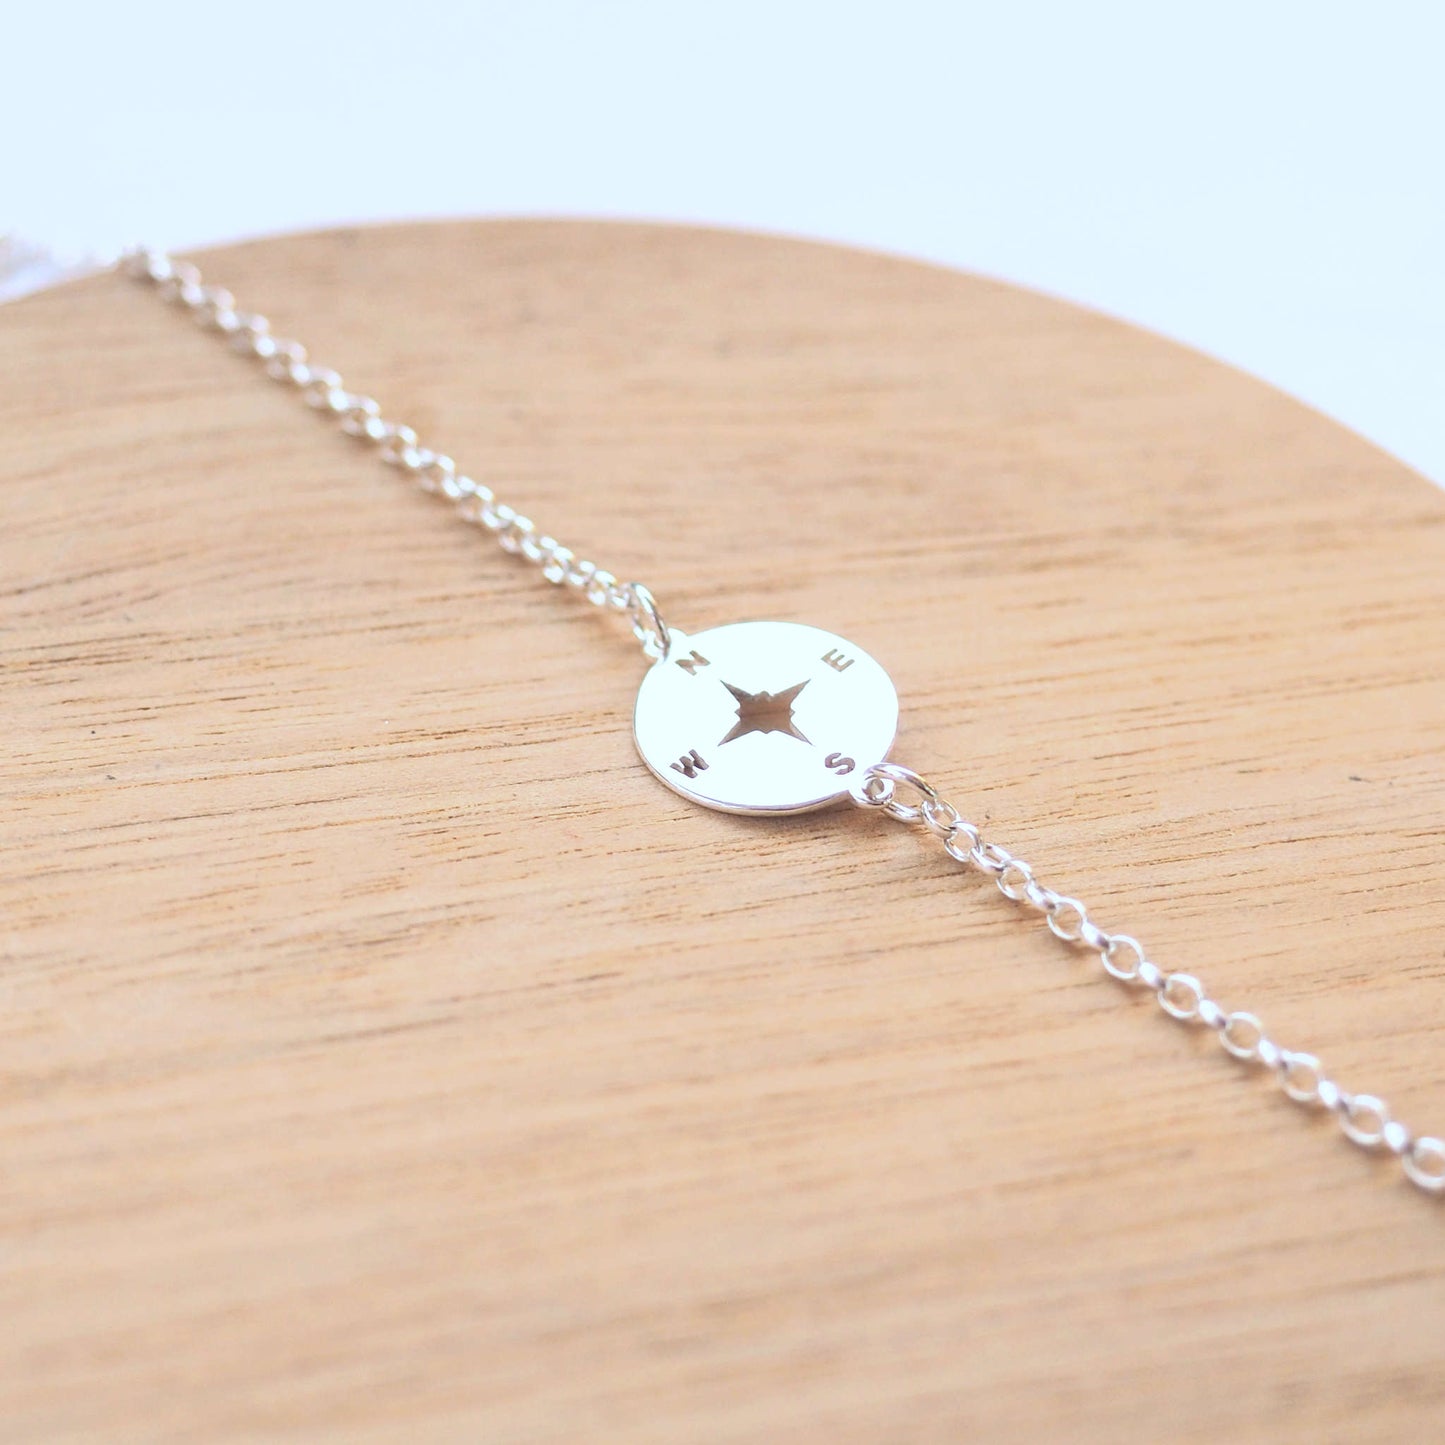 Compass Silver bracelet with a circle stamped direction compass as a centre focal. Handmade by maram jewellery in Edinburgh UK